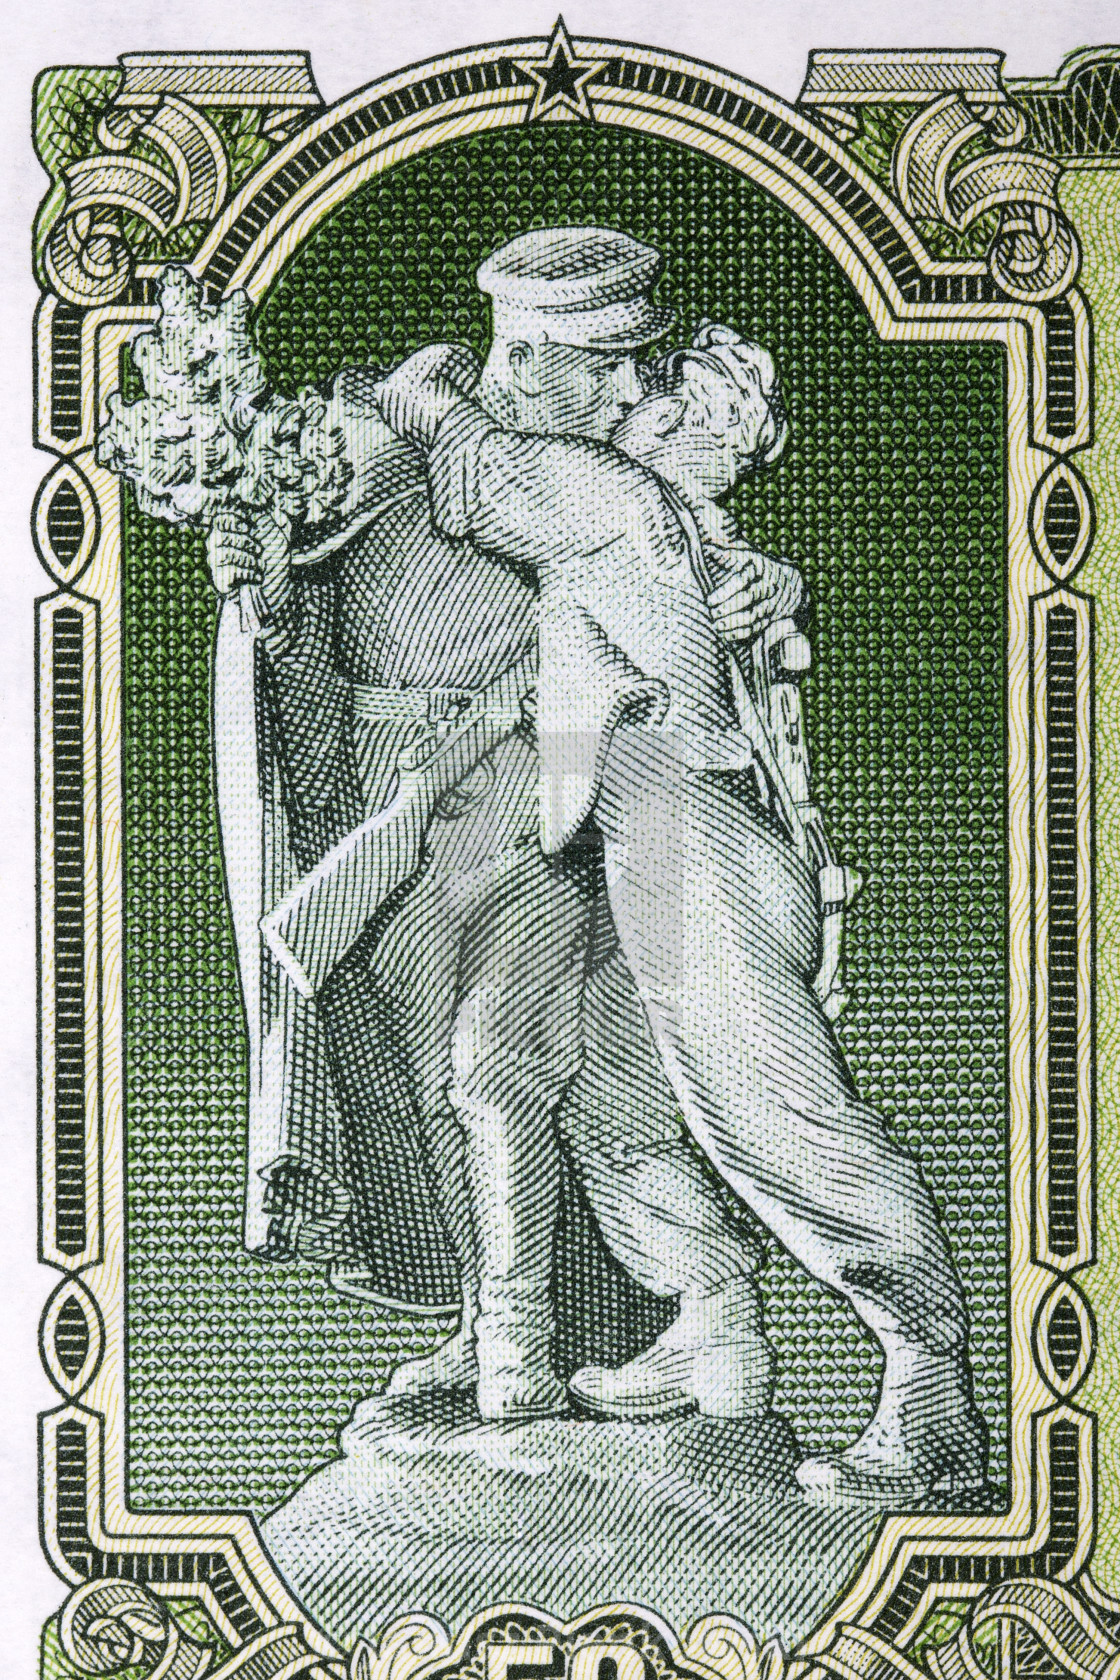 "Statue of partisan with Russian soldier from Czechoslovak money" stock image